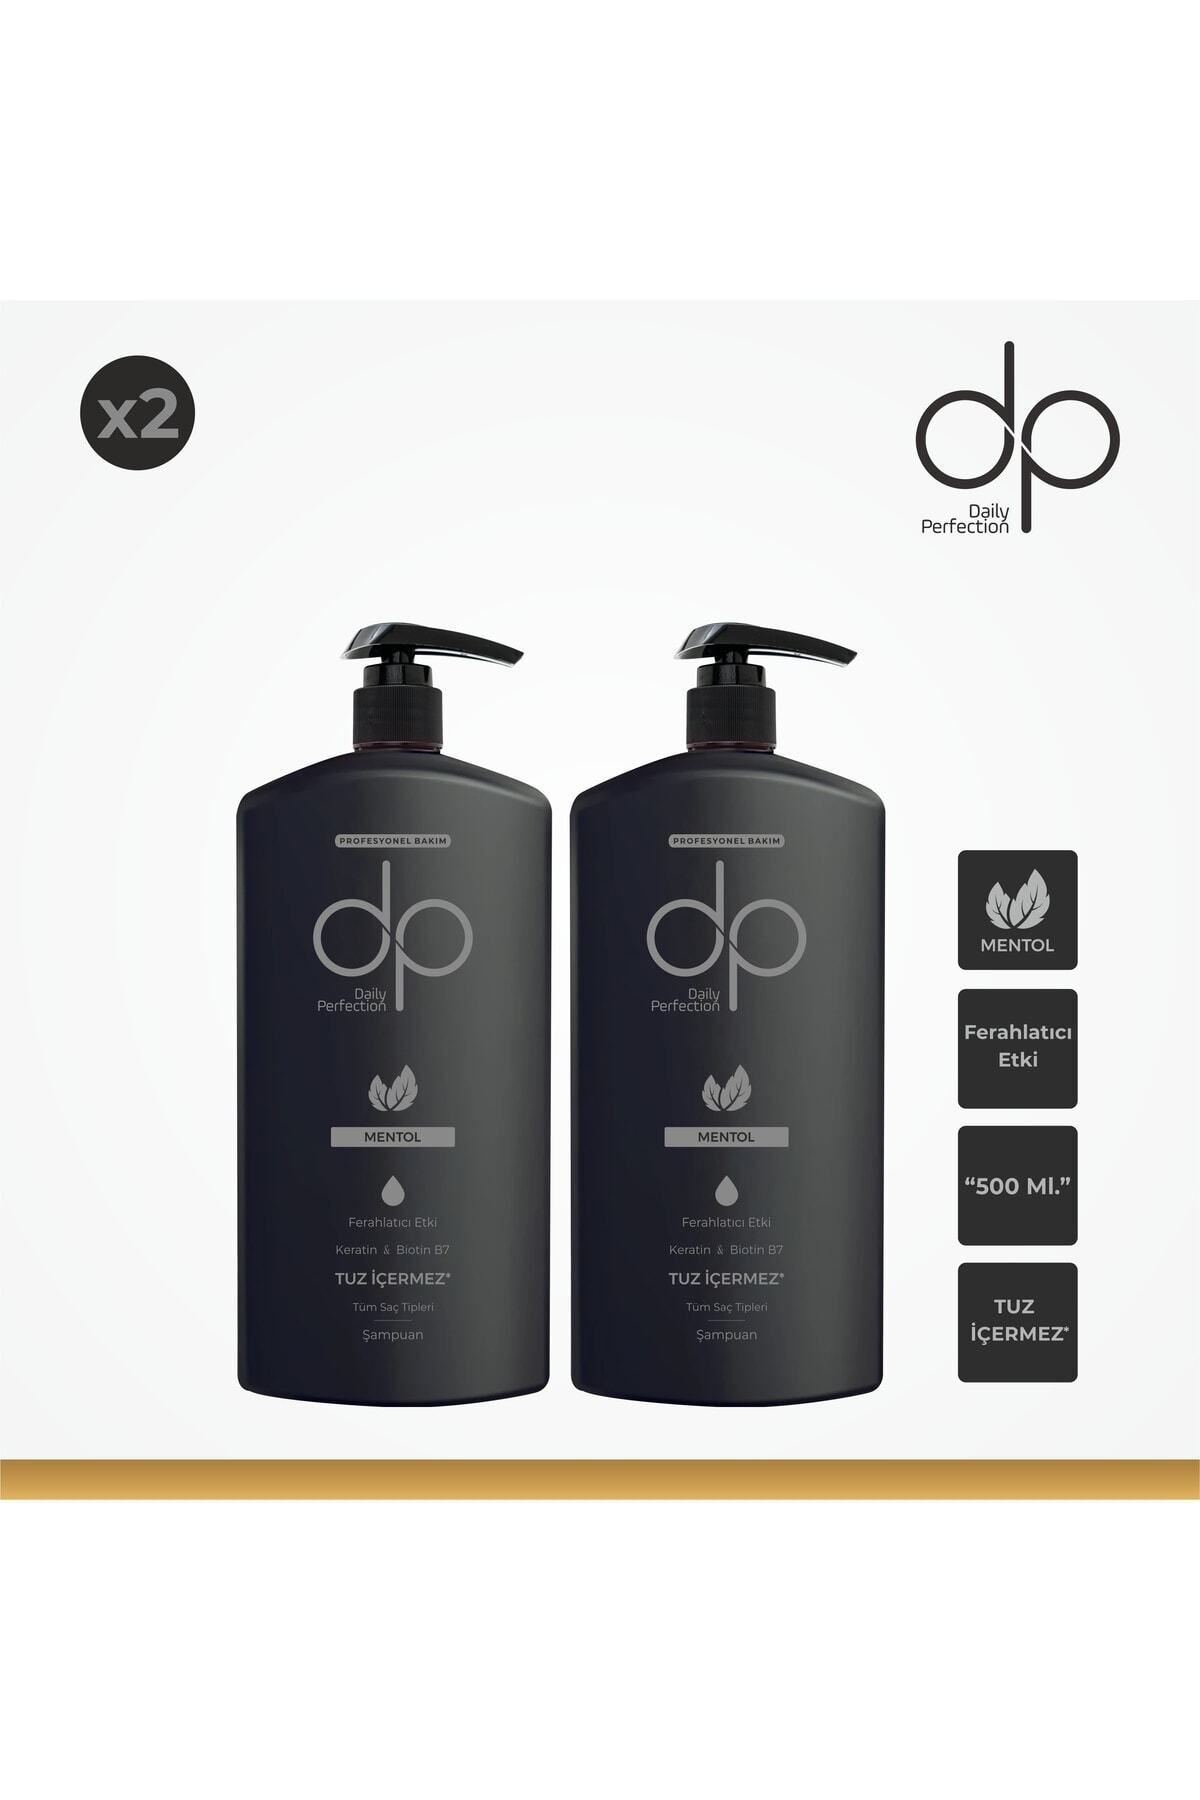 dp Daily Perfection Daily Şampuan Perfection Mentol 500ml X2 Adet